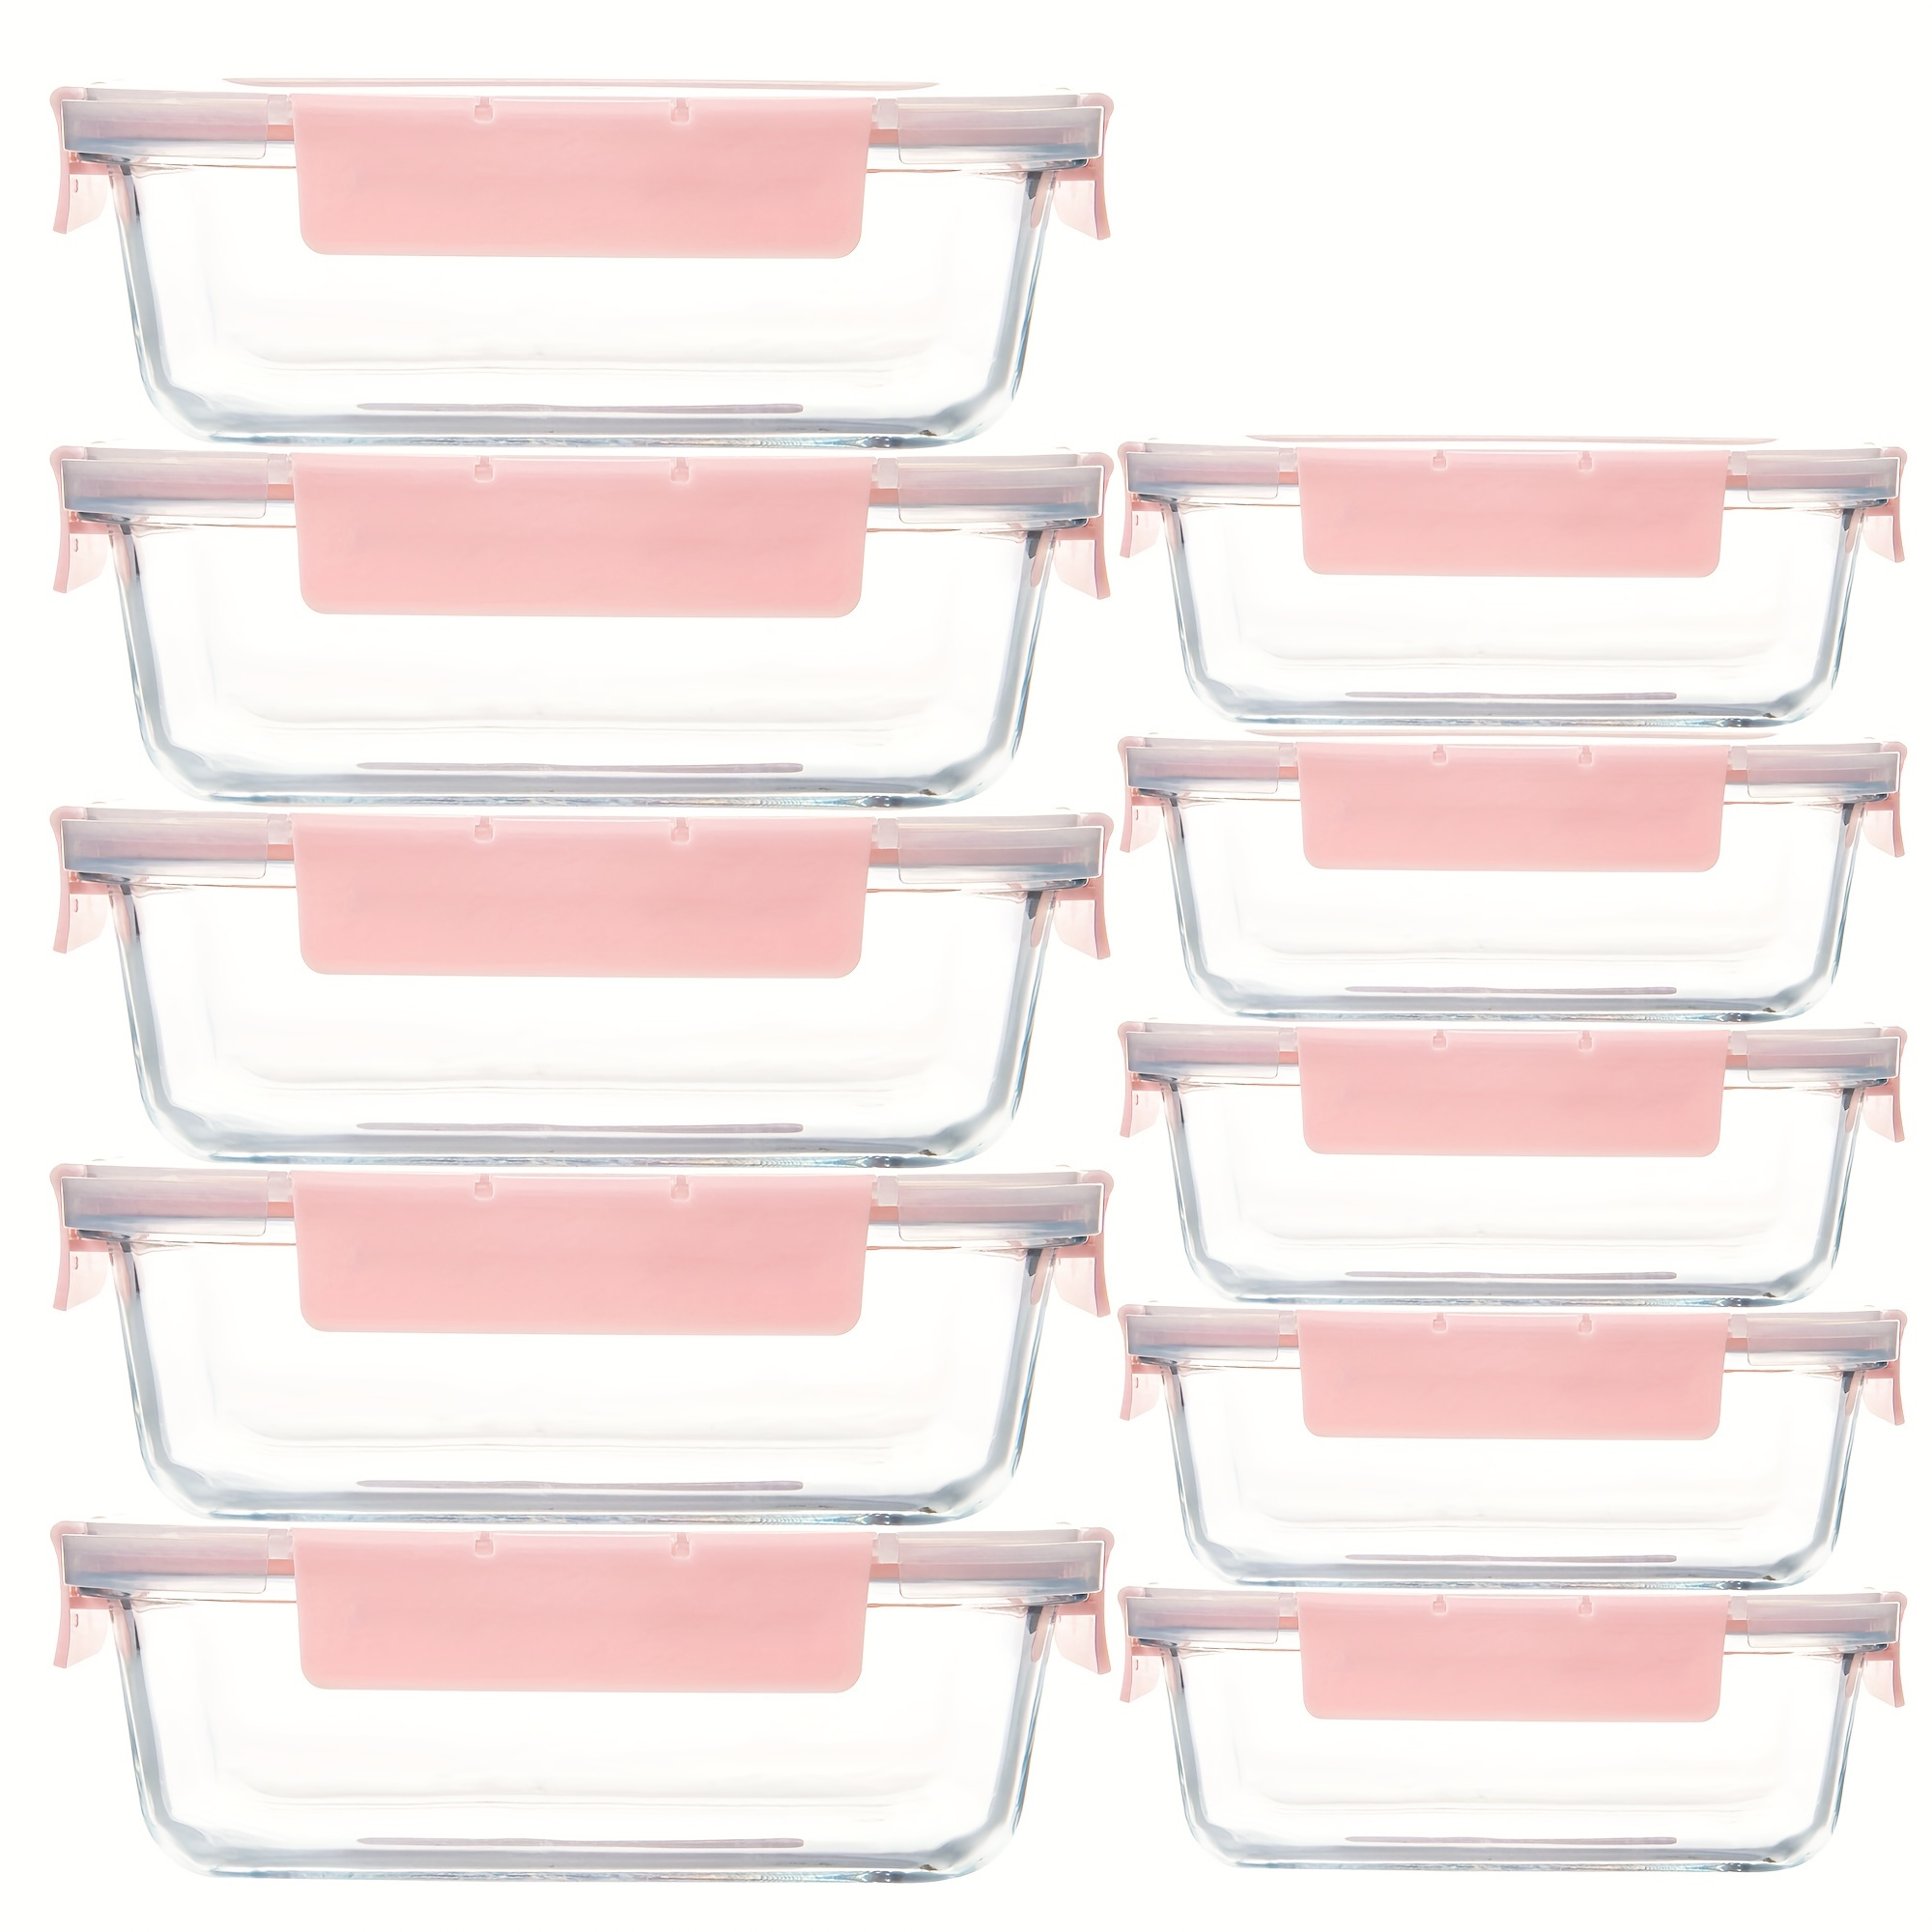 

10 Pack Glass Food Storage Containers With Airtight Lids, Ideal For Meal Prep, Lunches - Microwave And Dishwasher Safe